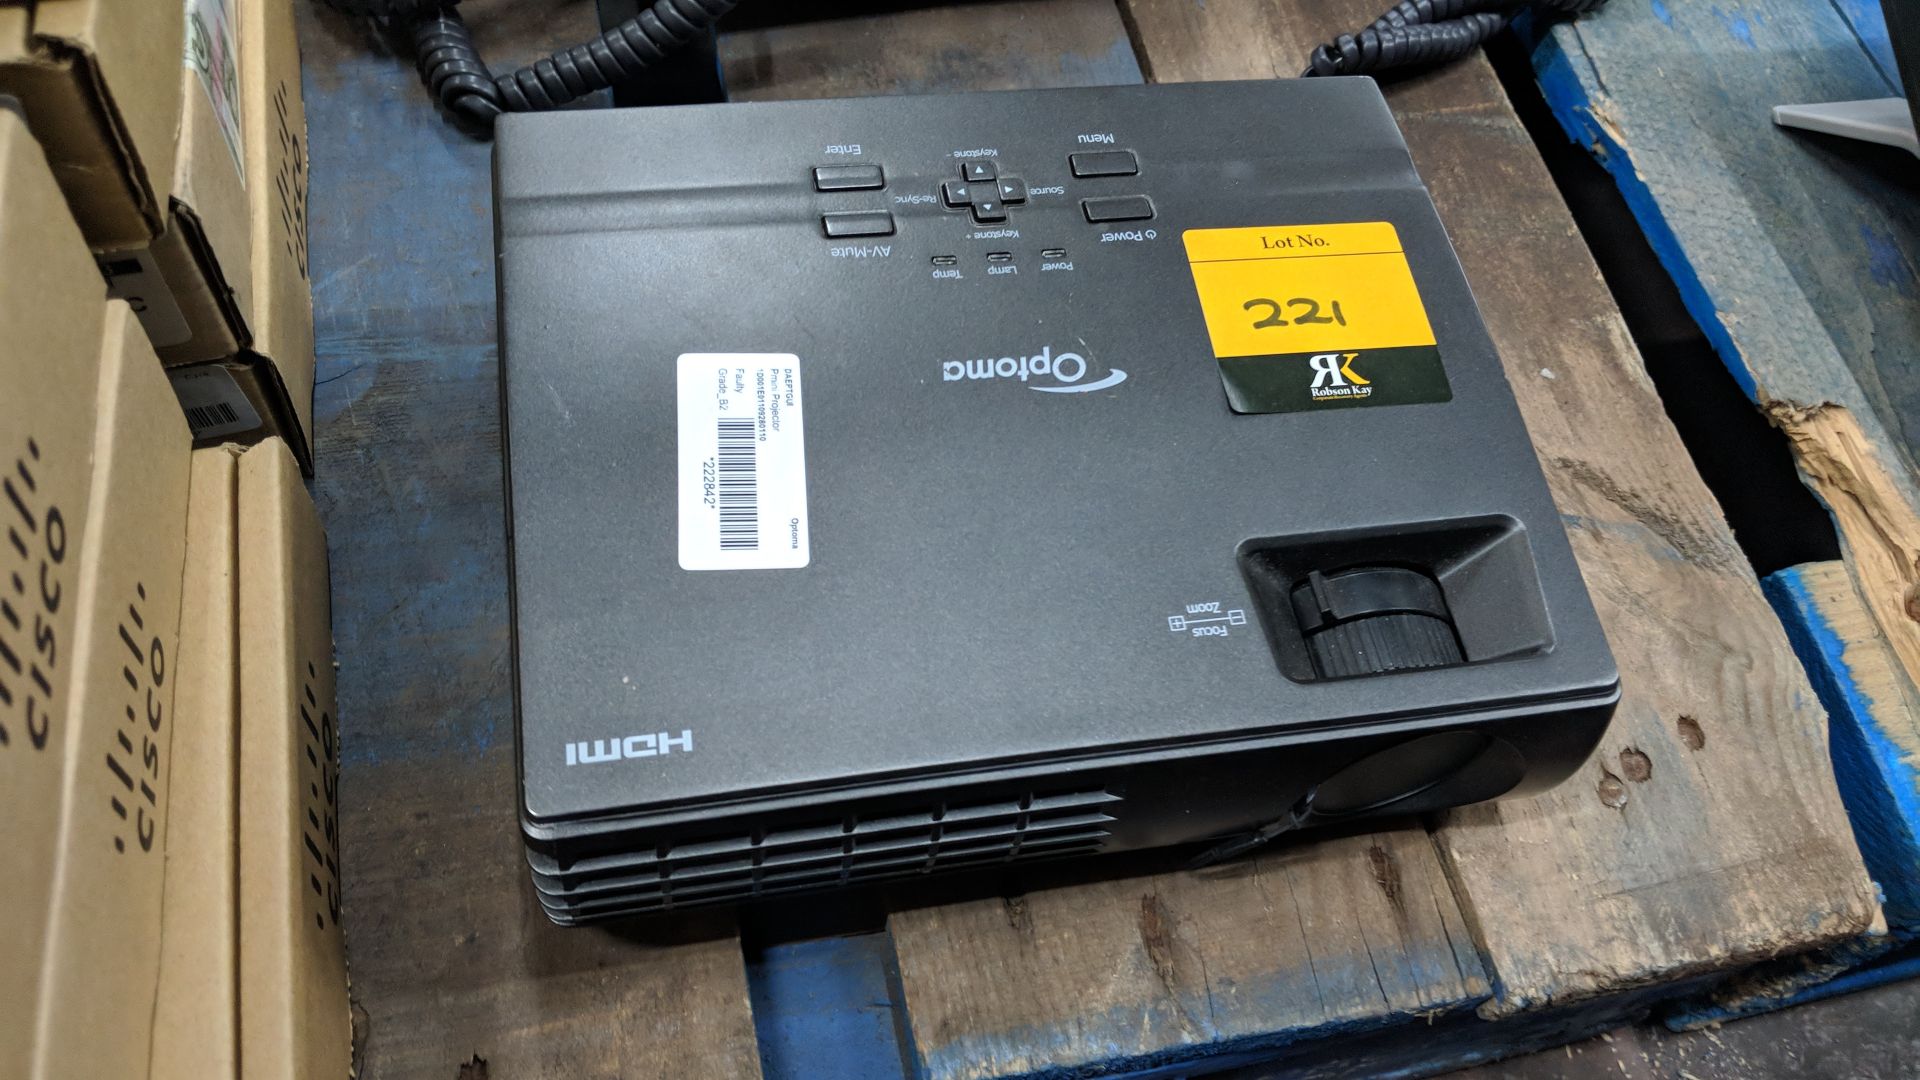 Optoma model DAEPTGUUI compact projector IMPORTANT: Please remember goods successfully bid upon must